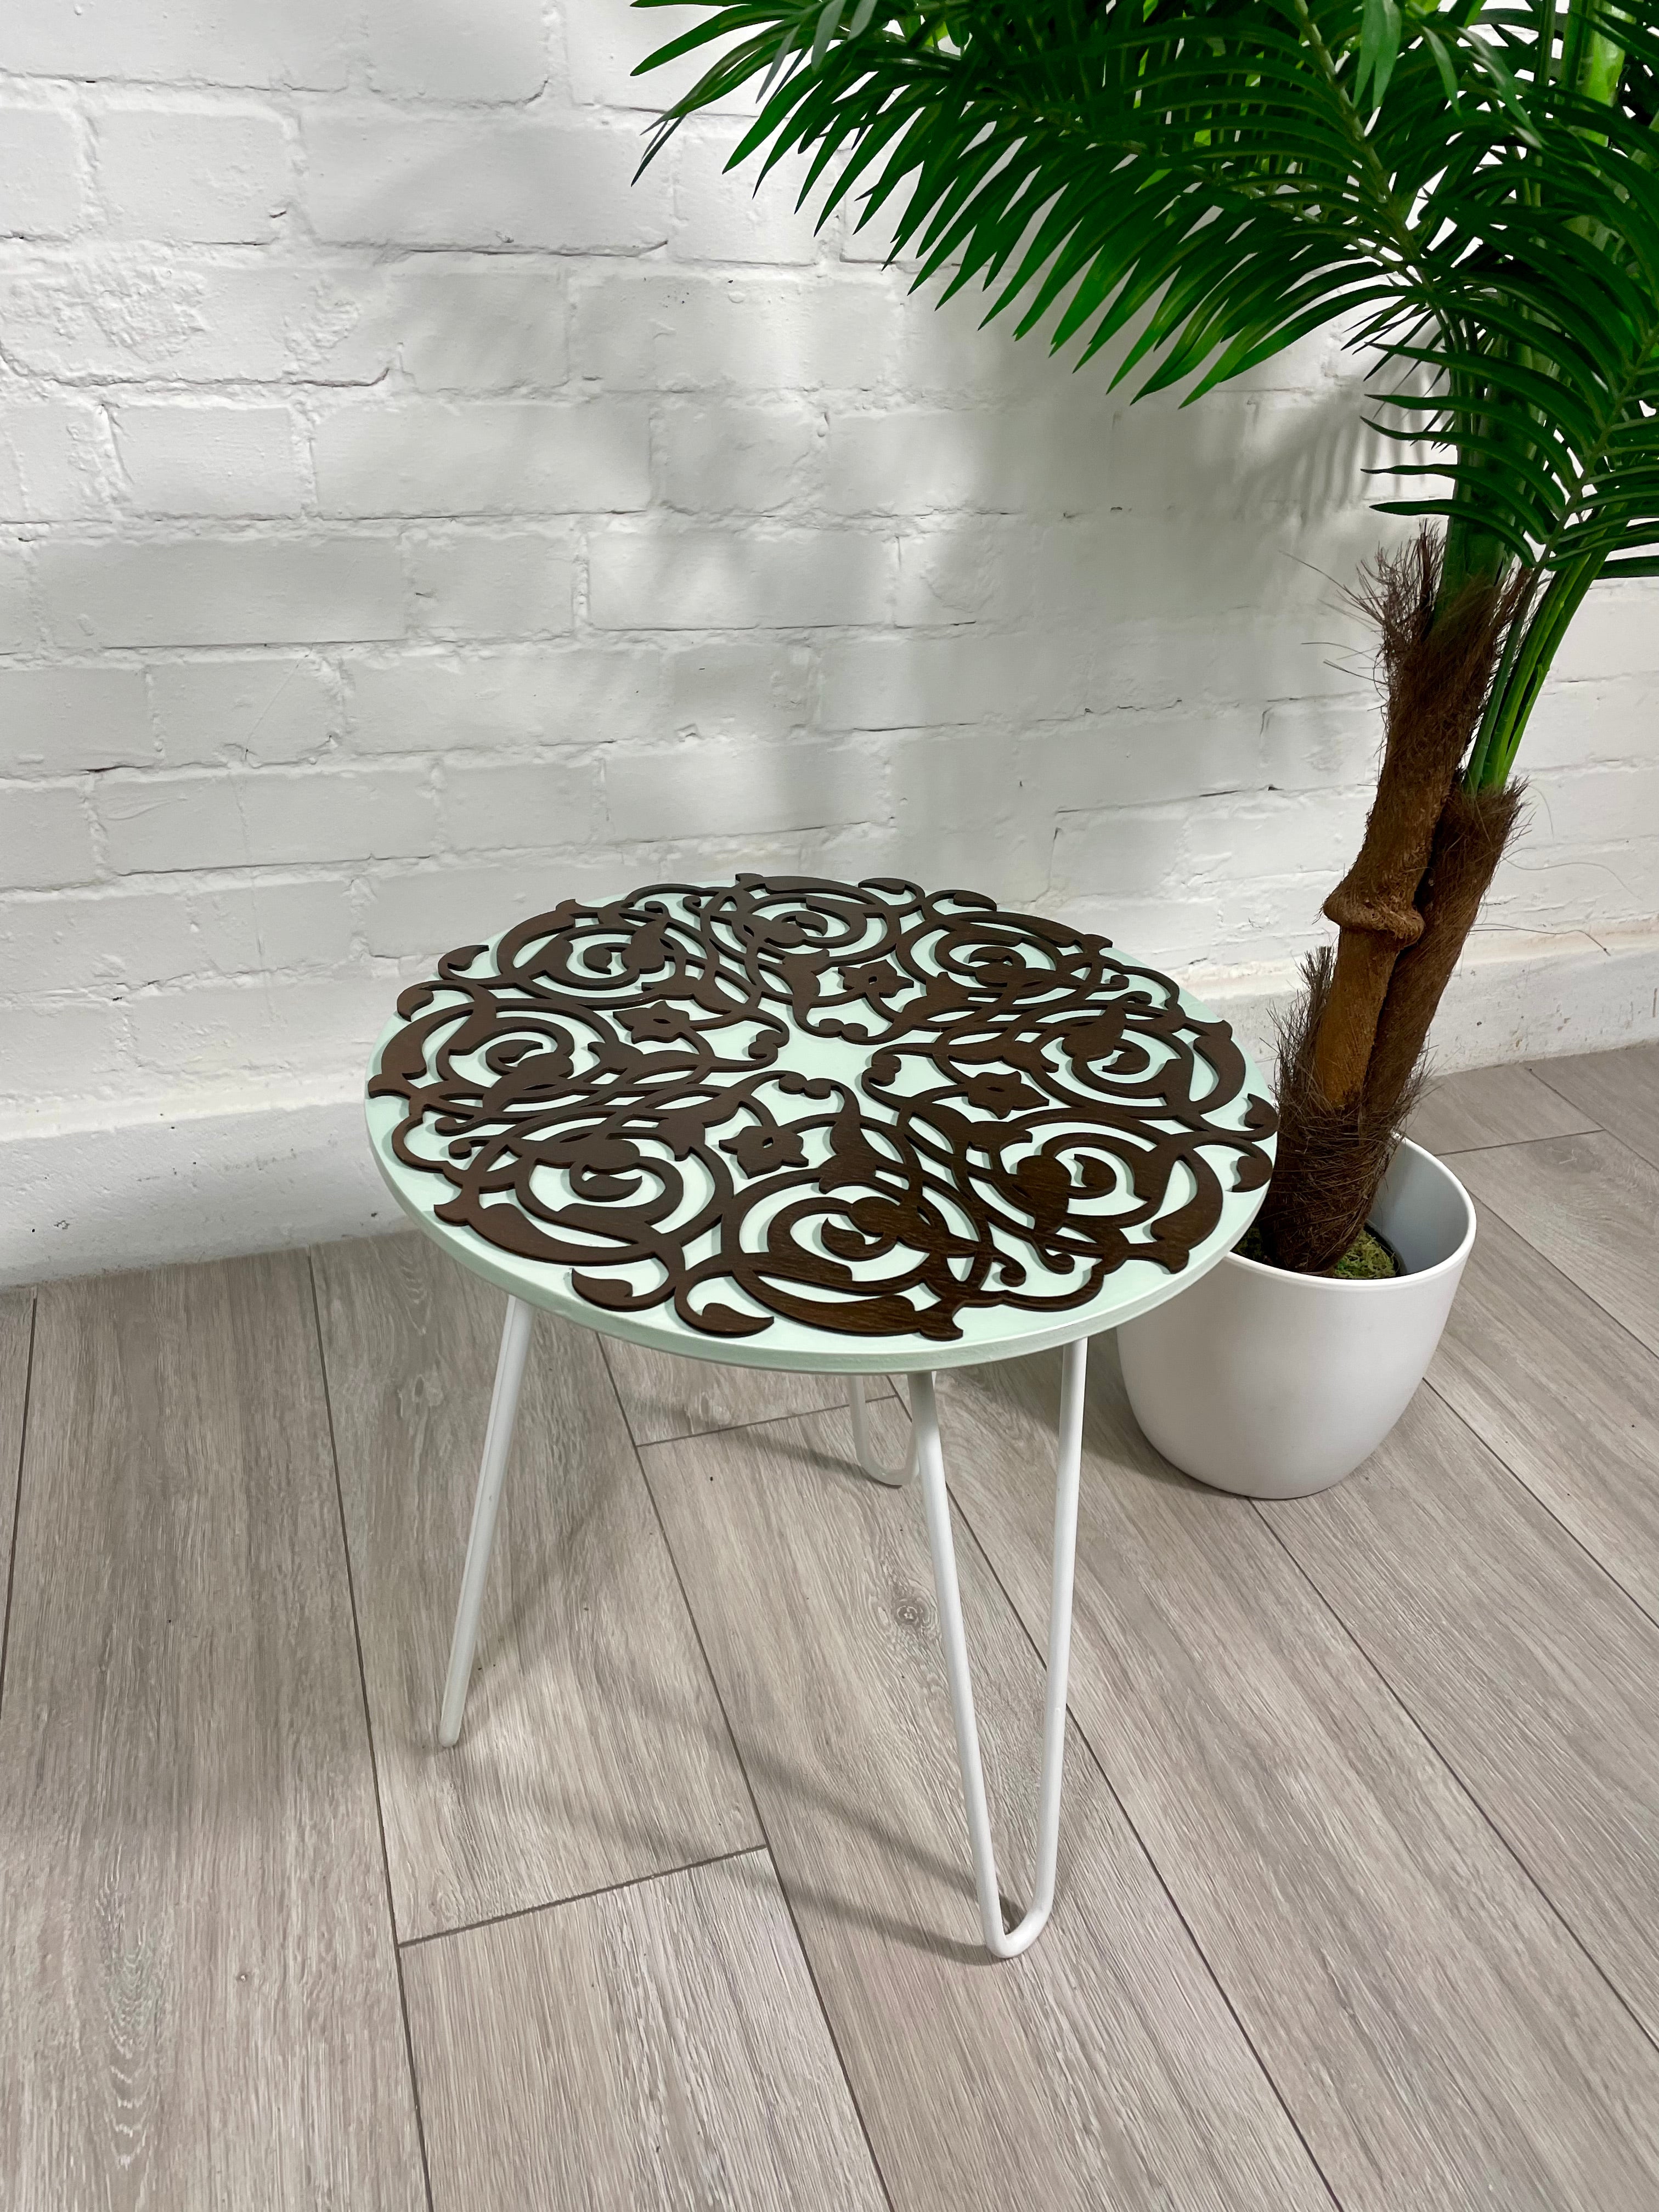 Green Pastel and Walnut finish side table with Arabesque fret work, and Pin legs